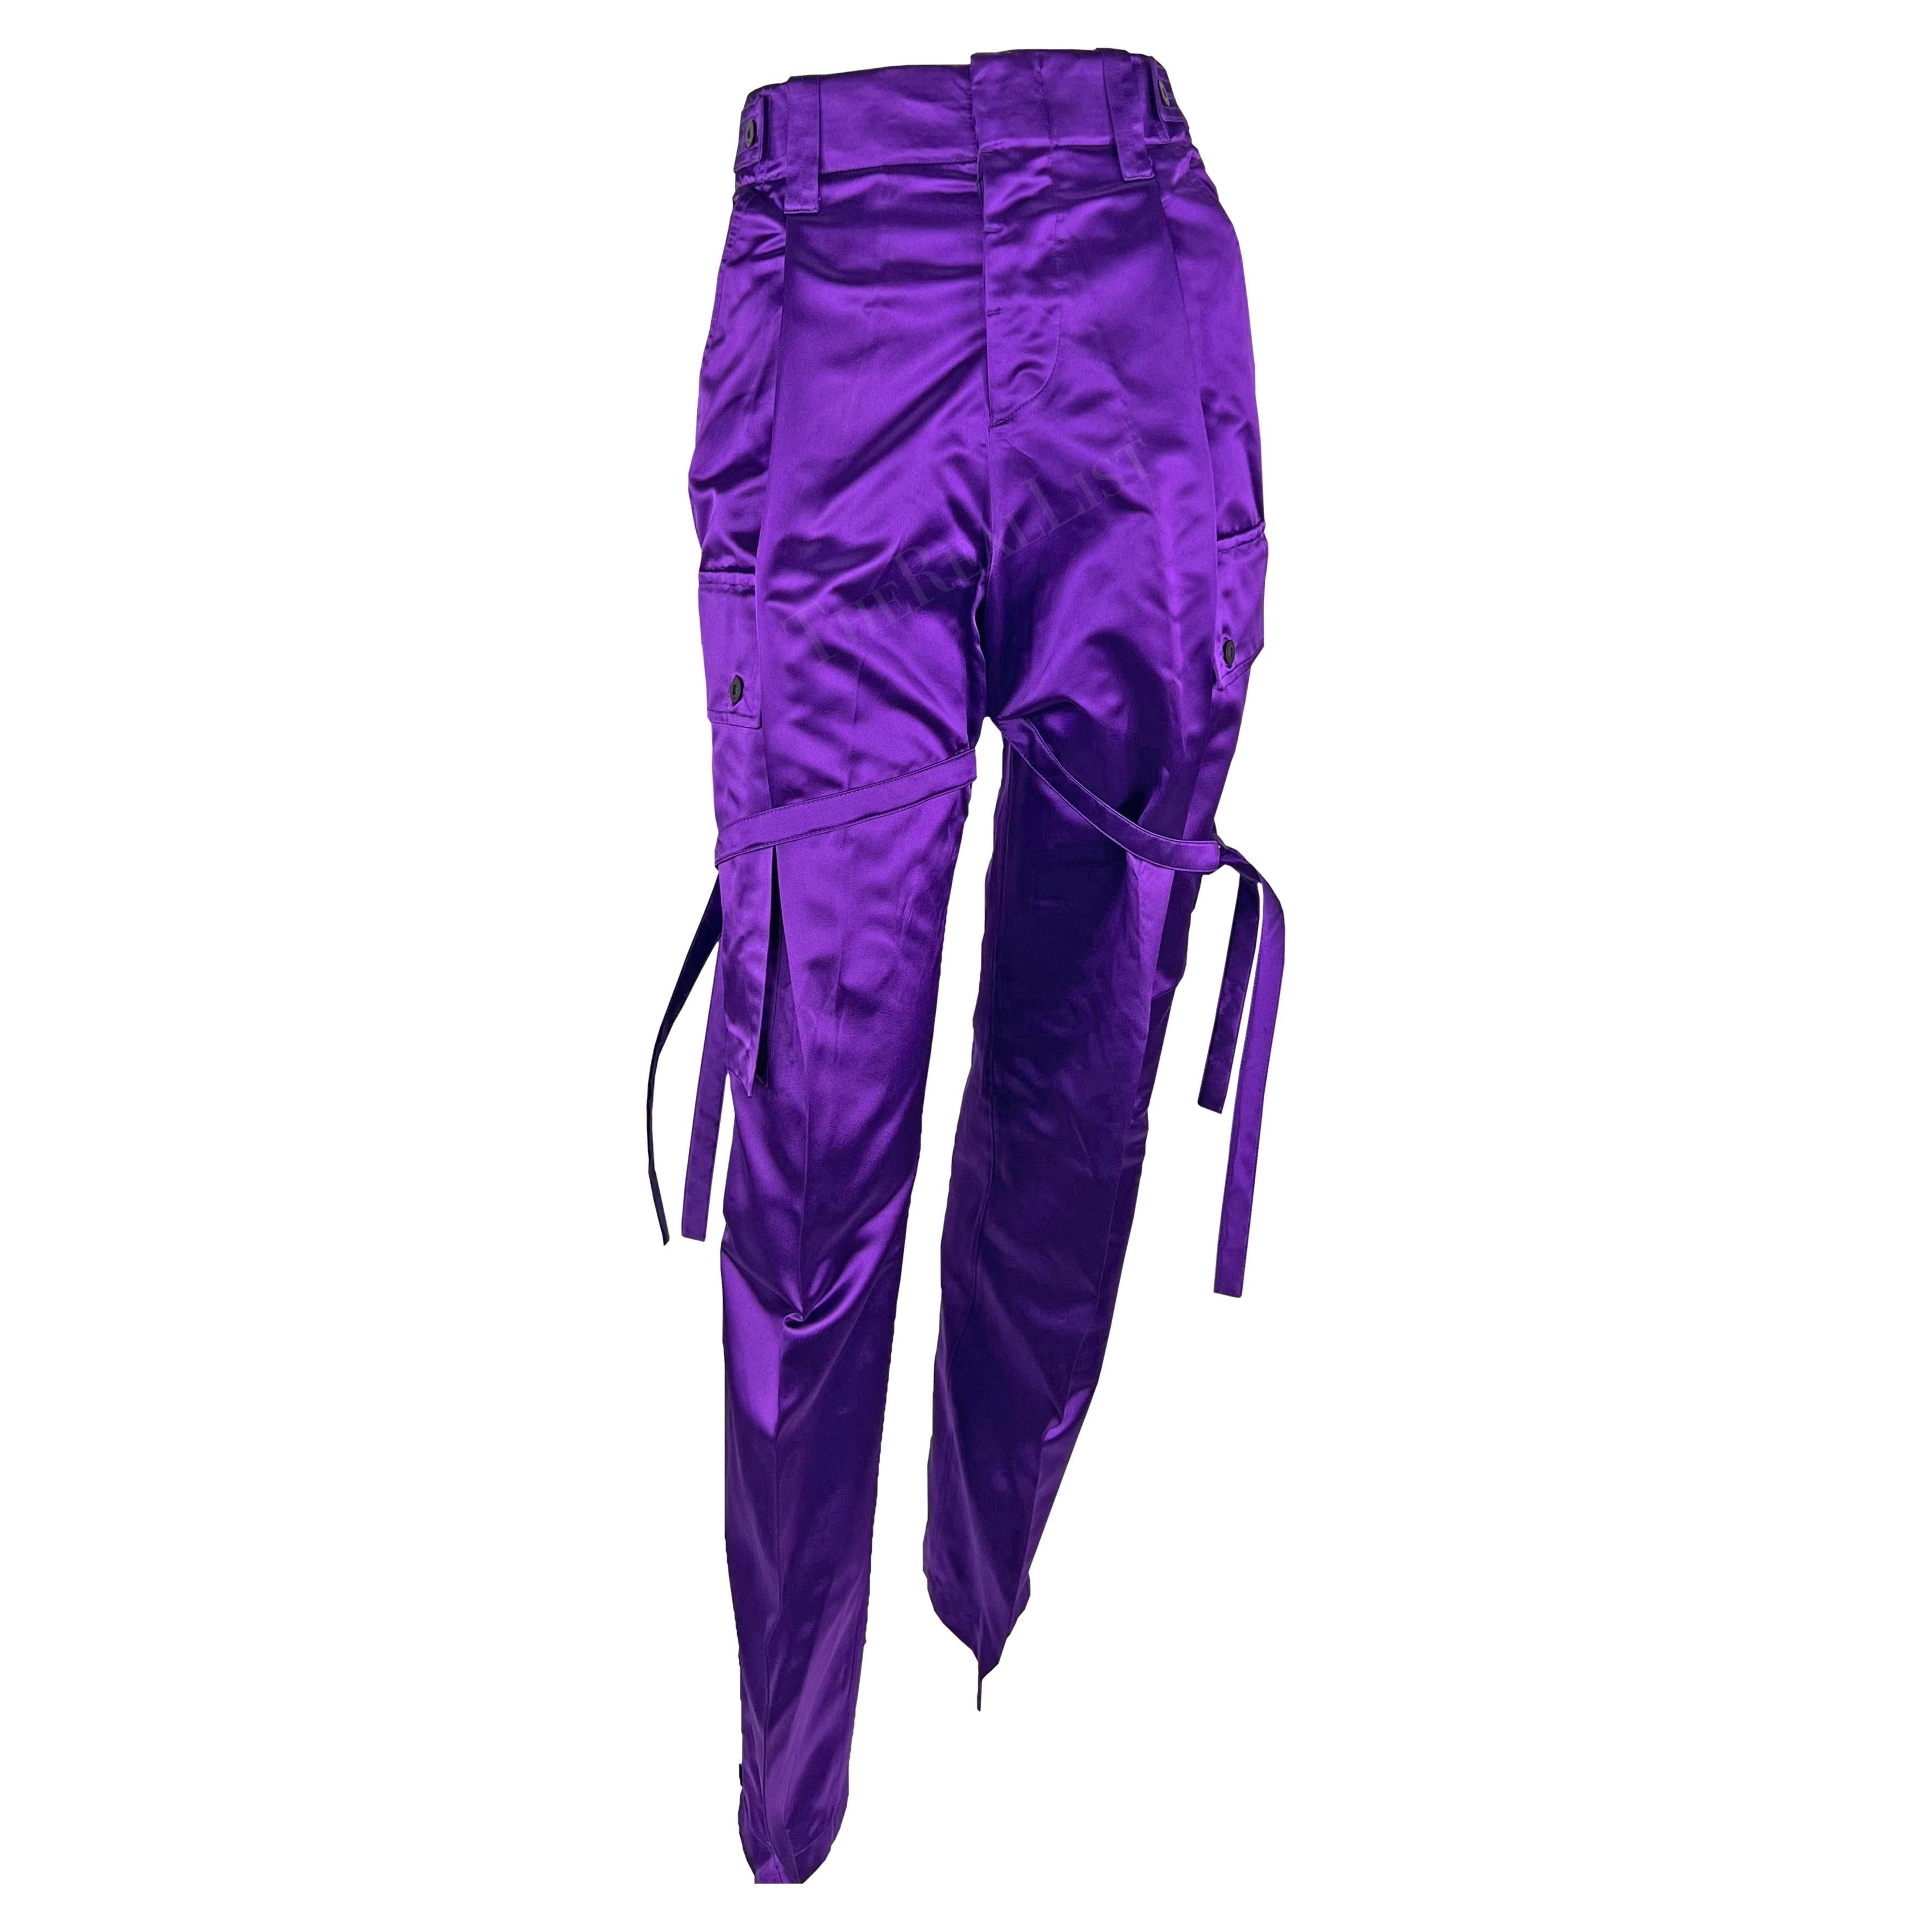 NWT S/S 2001 Gucci by Tom Ford Runway Purple Satin Tie Wide Leg Cargo Pants  For Sale